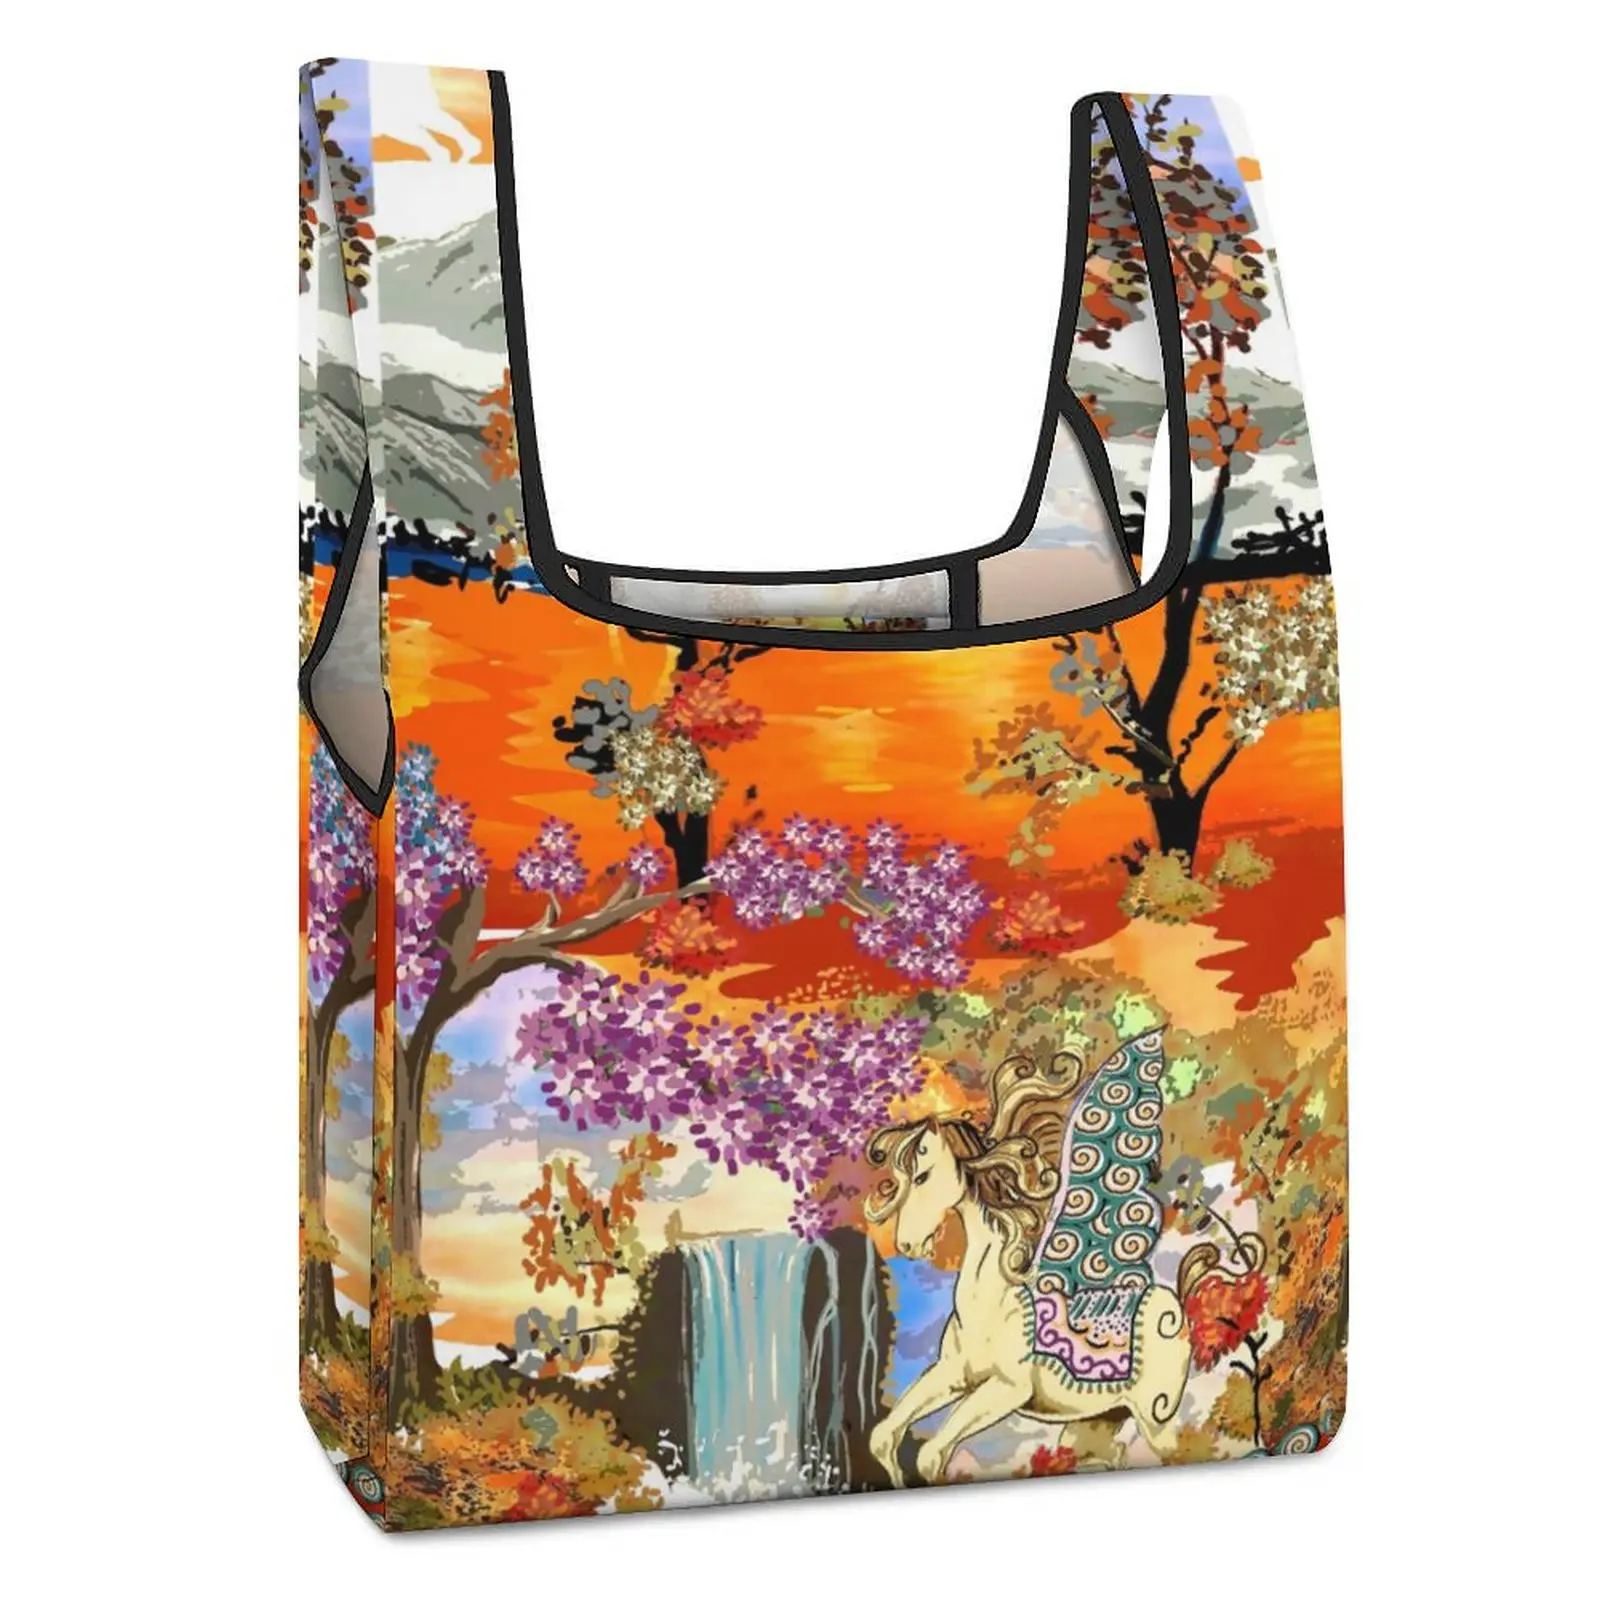 Customized Printed Collapsible Shopping Bag Double Strap Handbag Colored Printing Tote Casual Woman Grocery Bag Custom Pattern color blocked tote shopping handbag straps for crossbody full print exotic tote casual woman grocery bag custom pattern